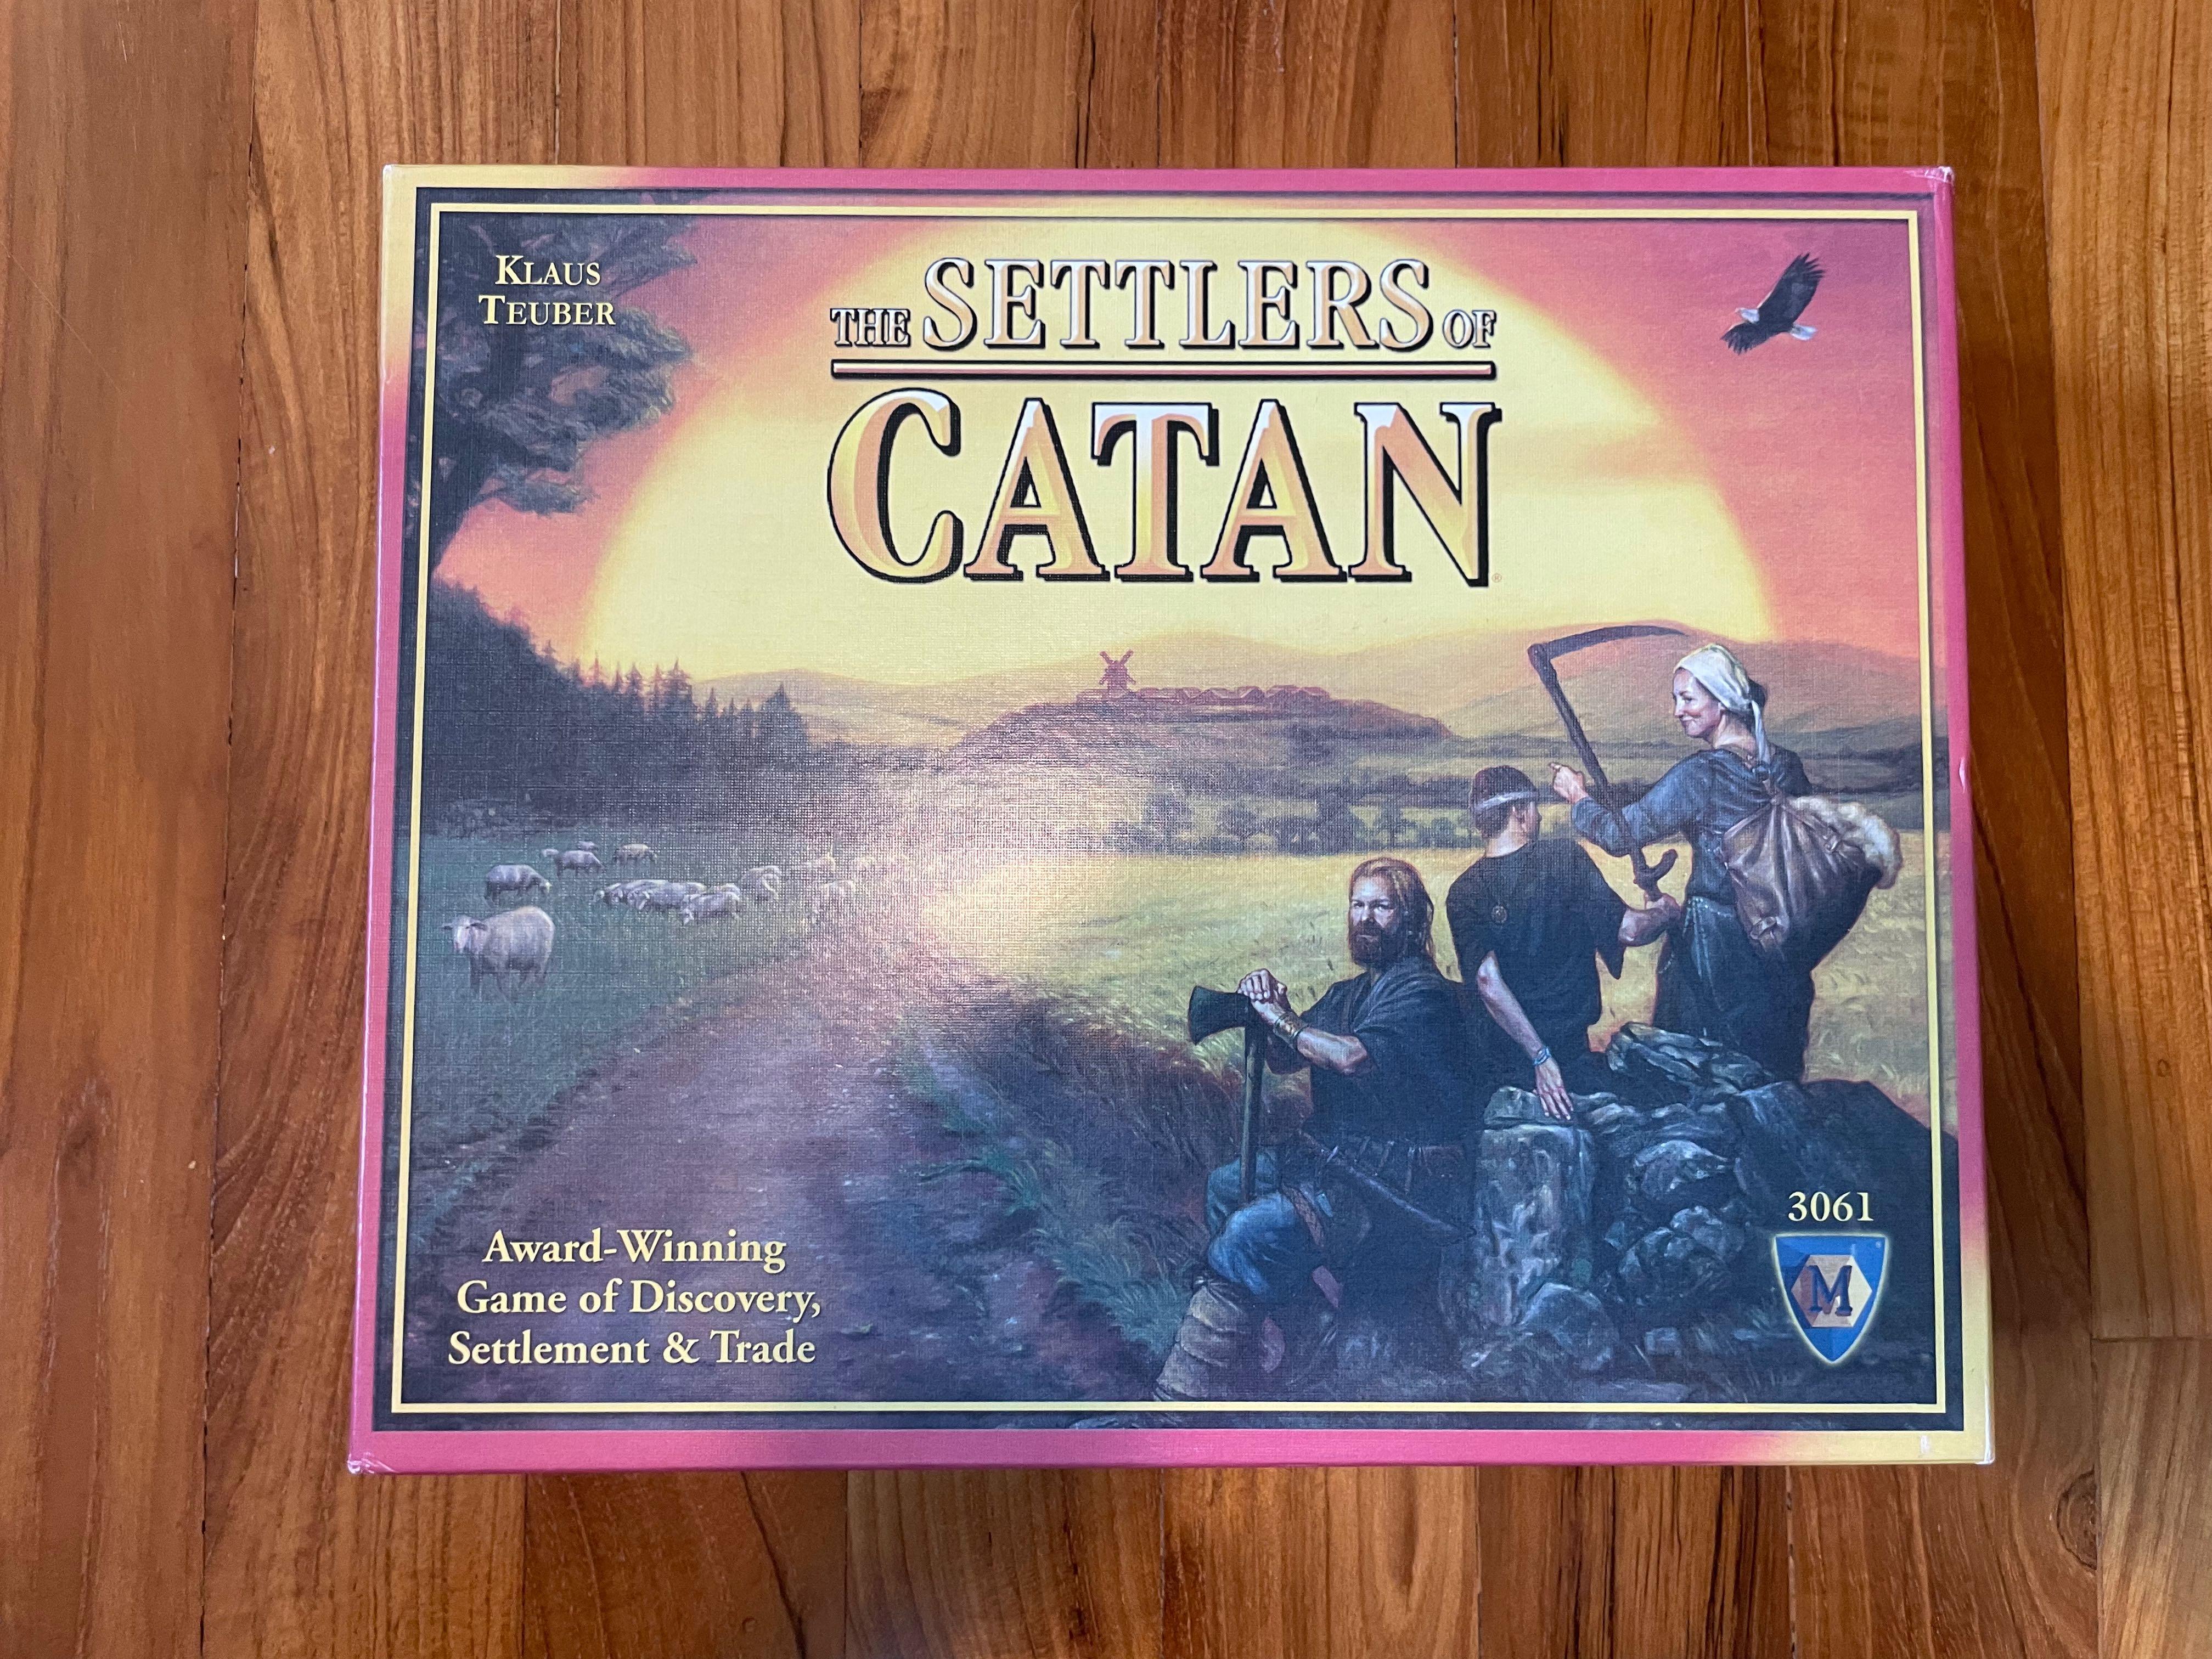 Catan Board Game Award Winning New 5th Edition Sealed New The Settlers of Catan 